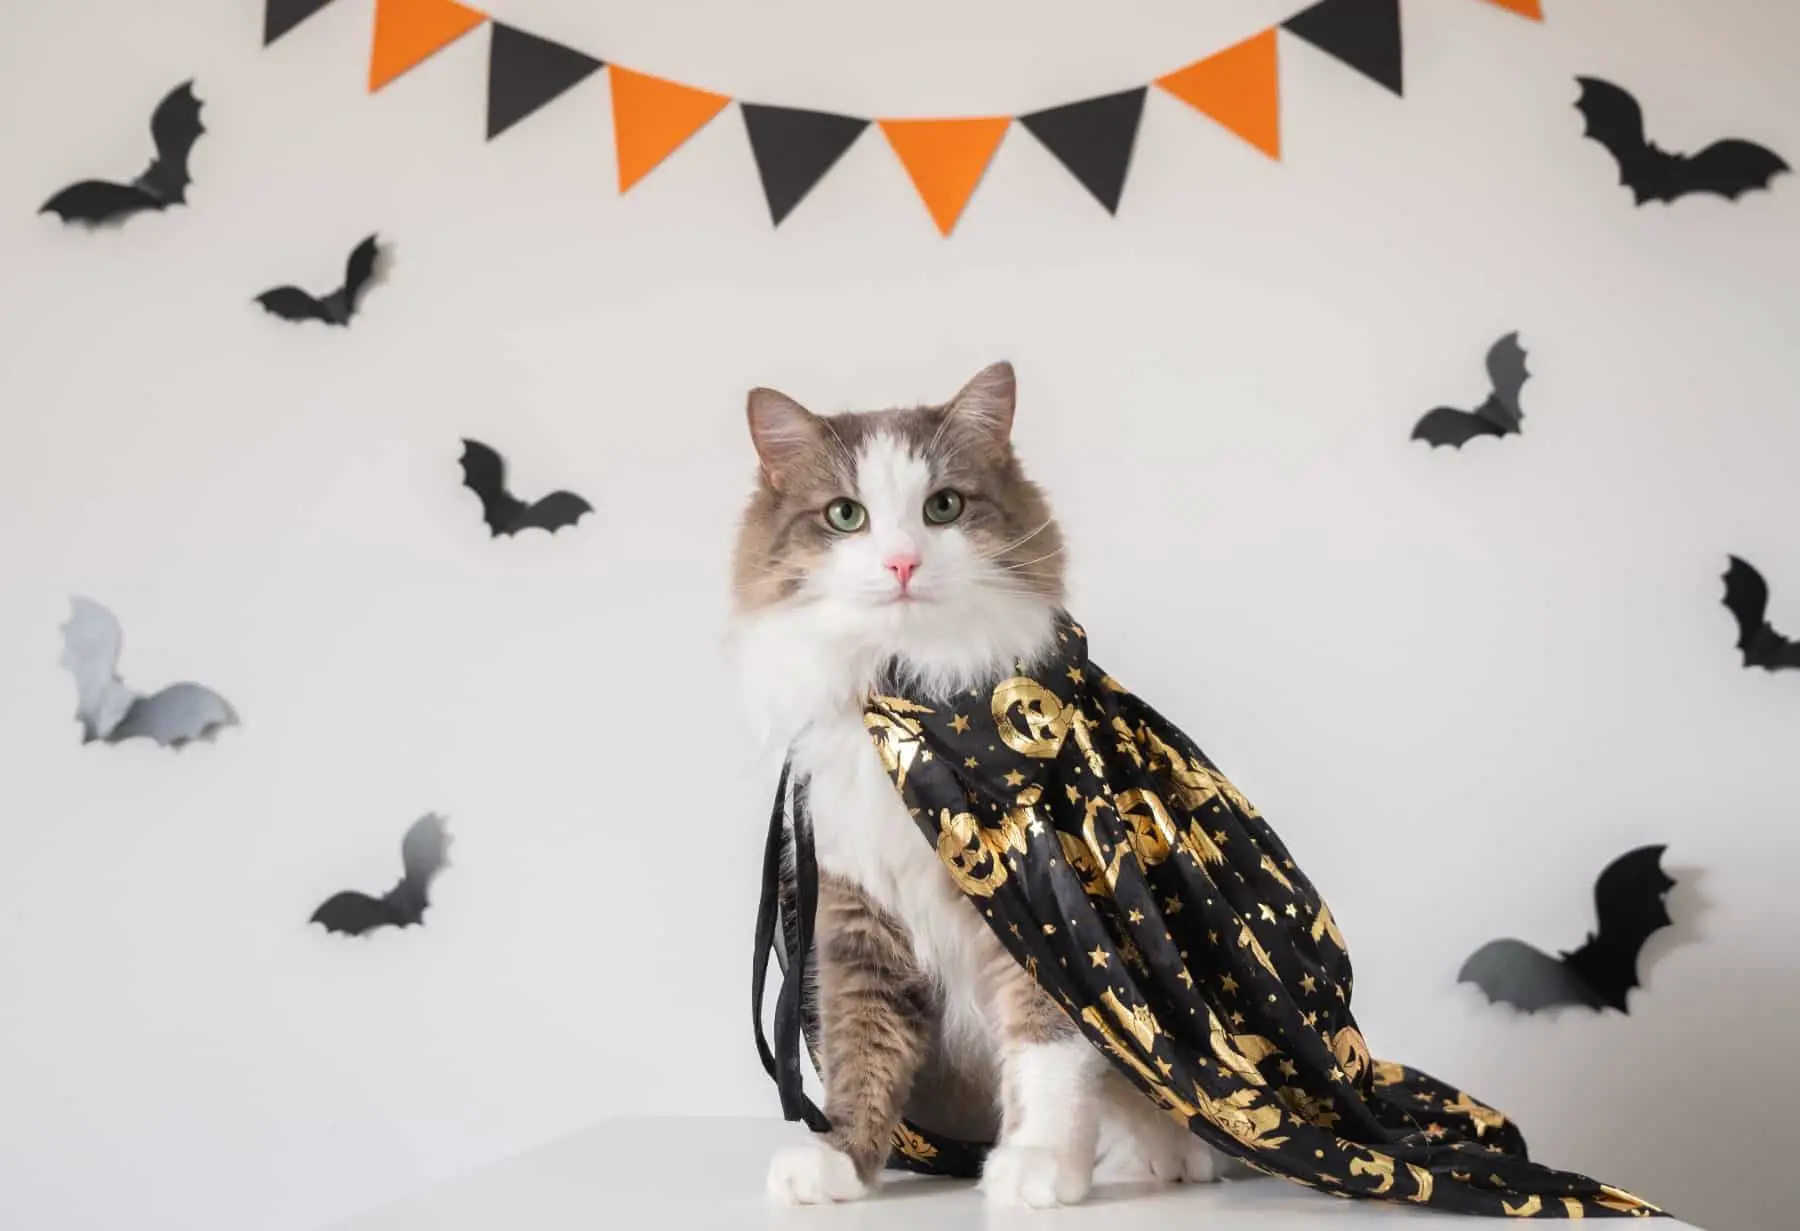 Halloween Costumes For Cats